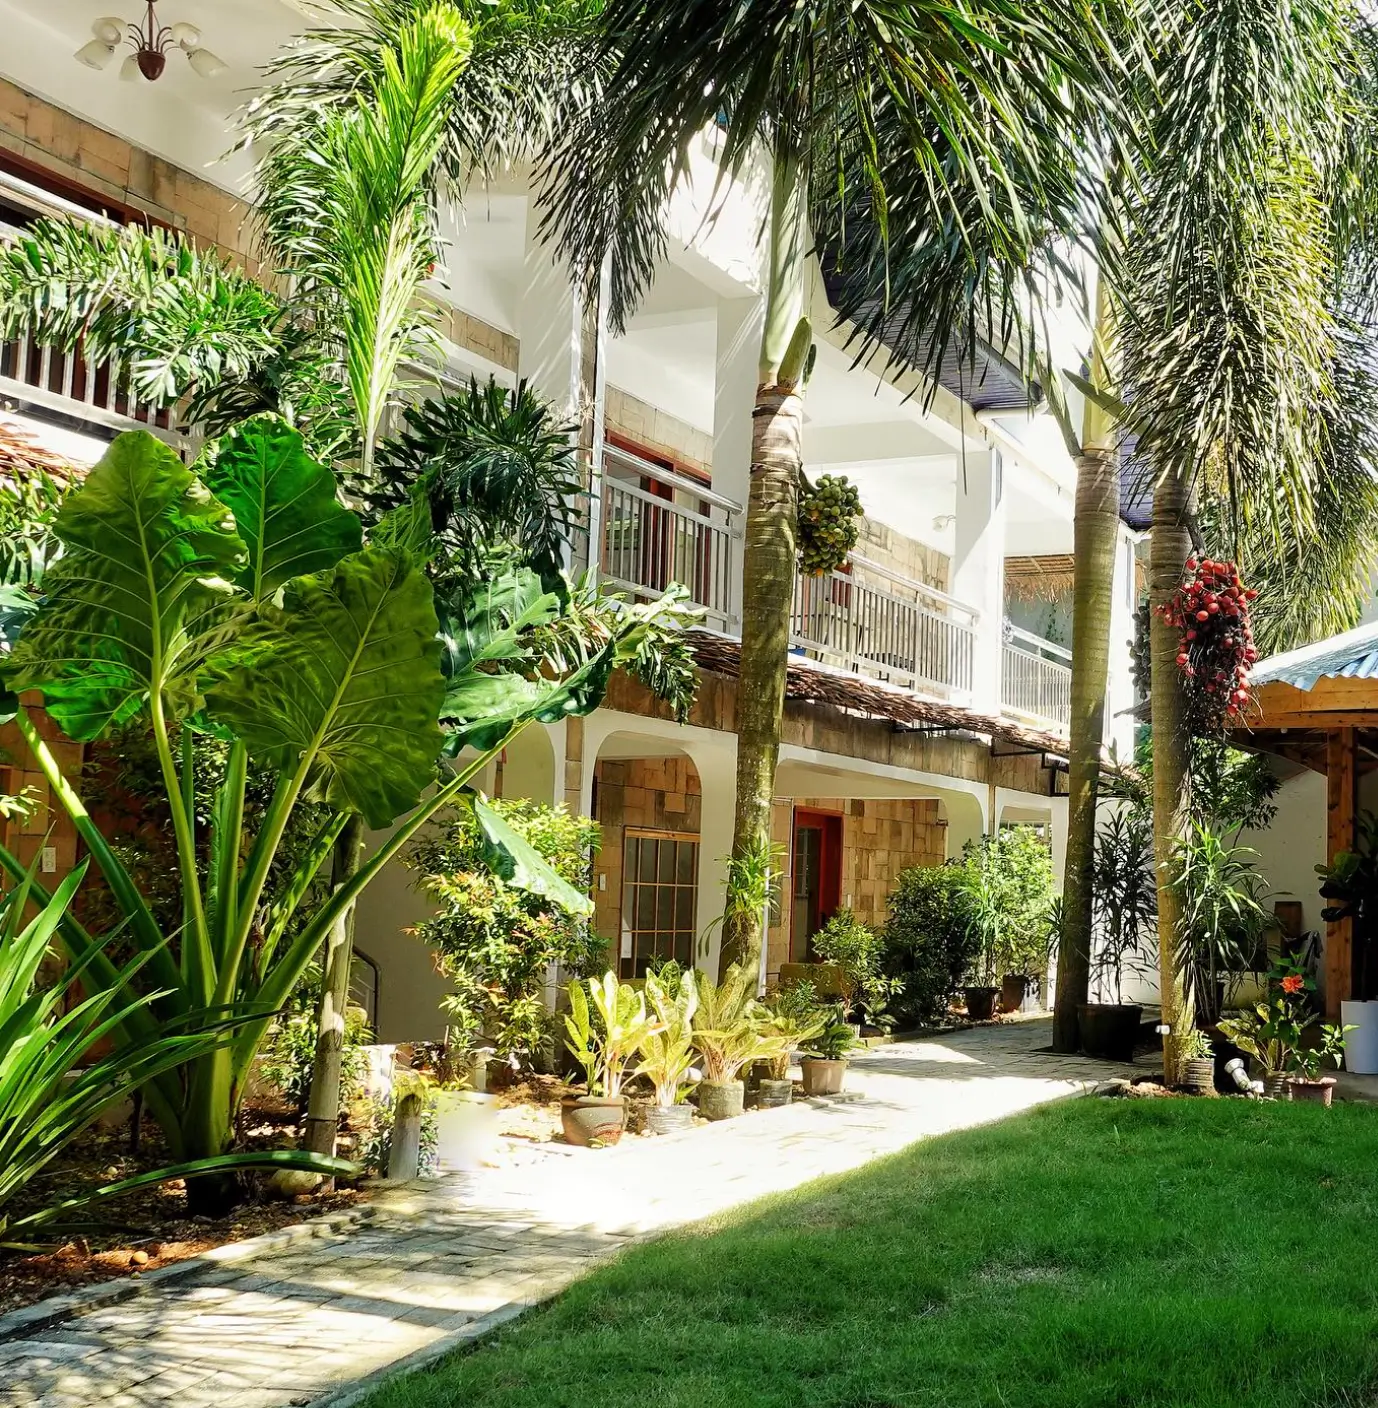 Lush garden pathway at Senare Boracay Hotel, showcasing a variety of tropical plants and palm trees flanking a paved walkway leading to charming stone-clad buildings with white balconies